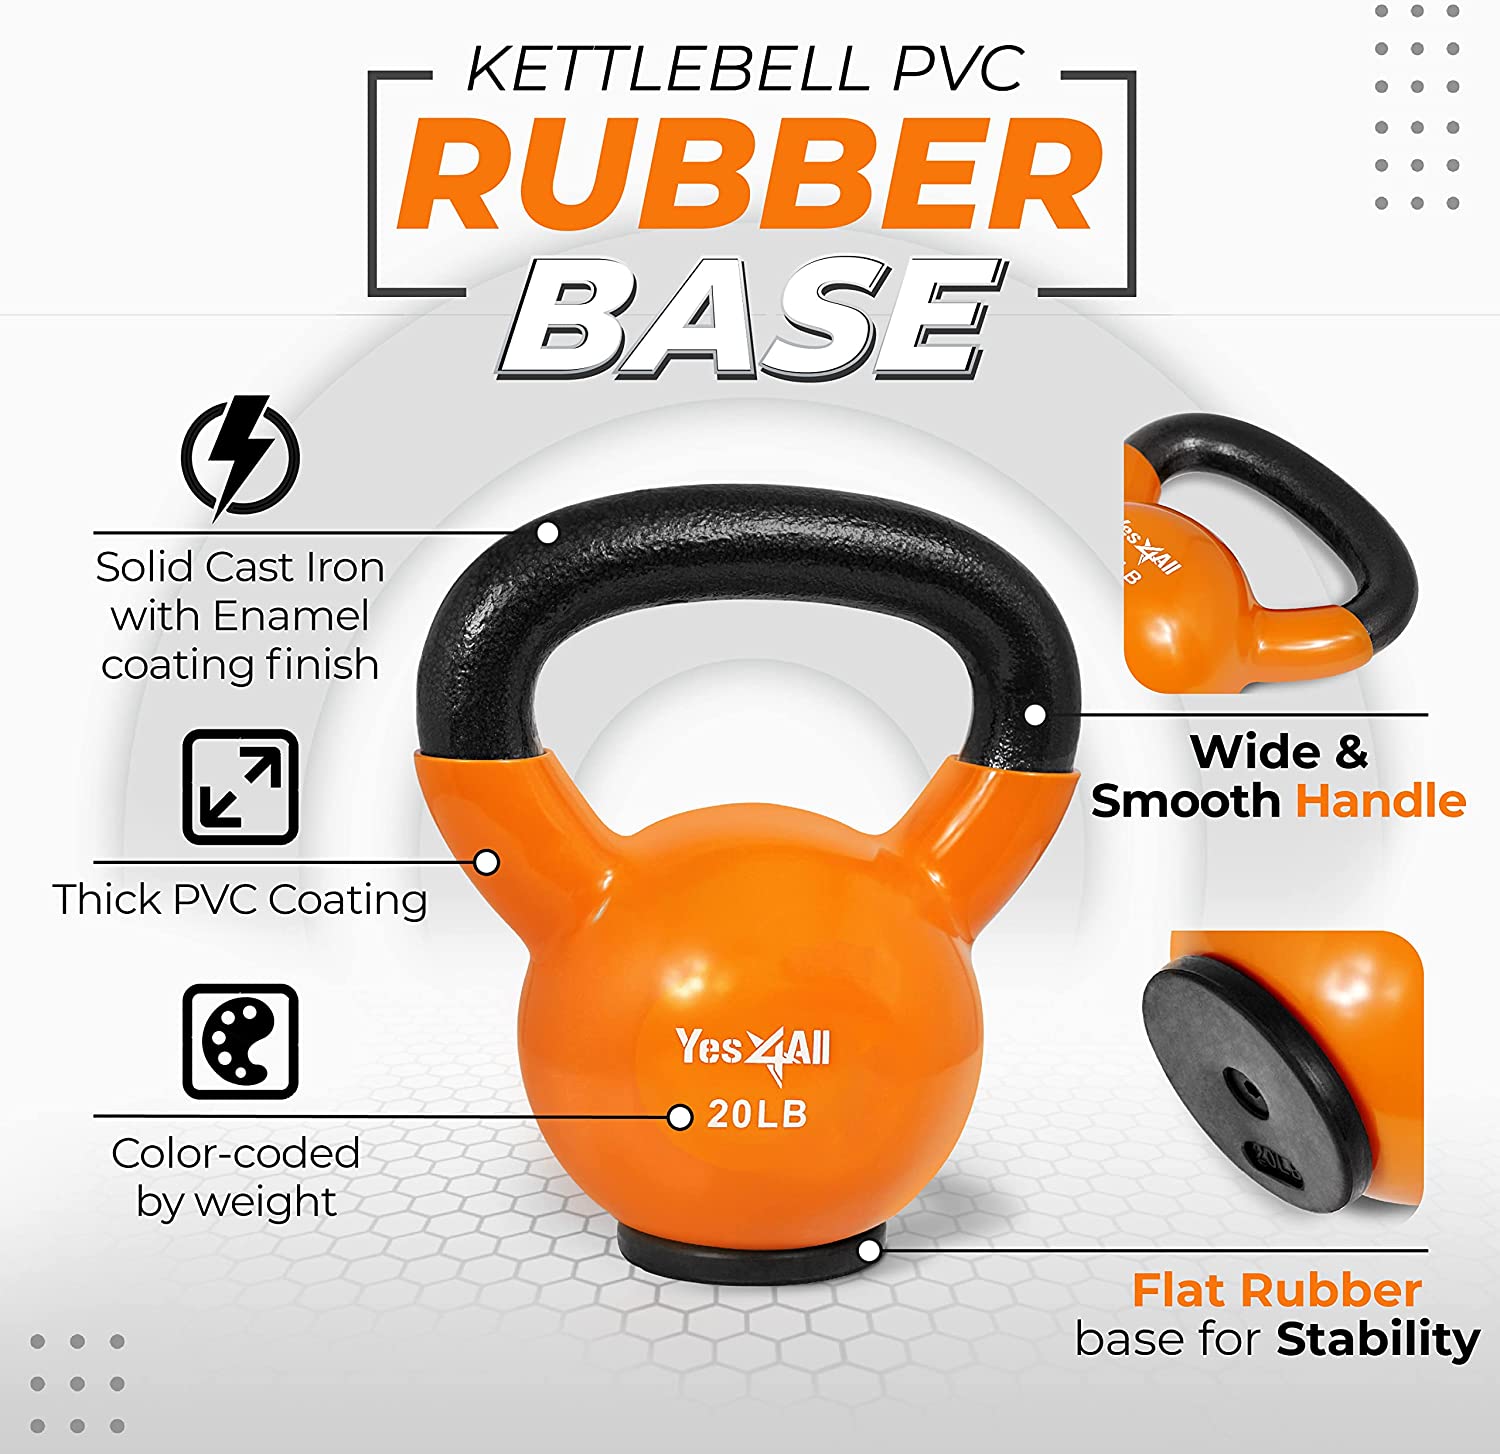 Yes4All 20lb Vinyl Coated / PVC Kettlebell with Rubber Base, Orange, Single - image 3 of 8